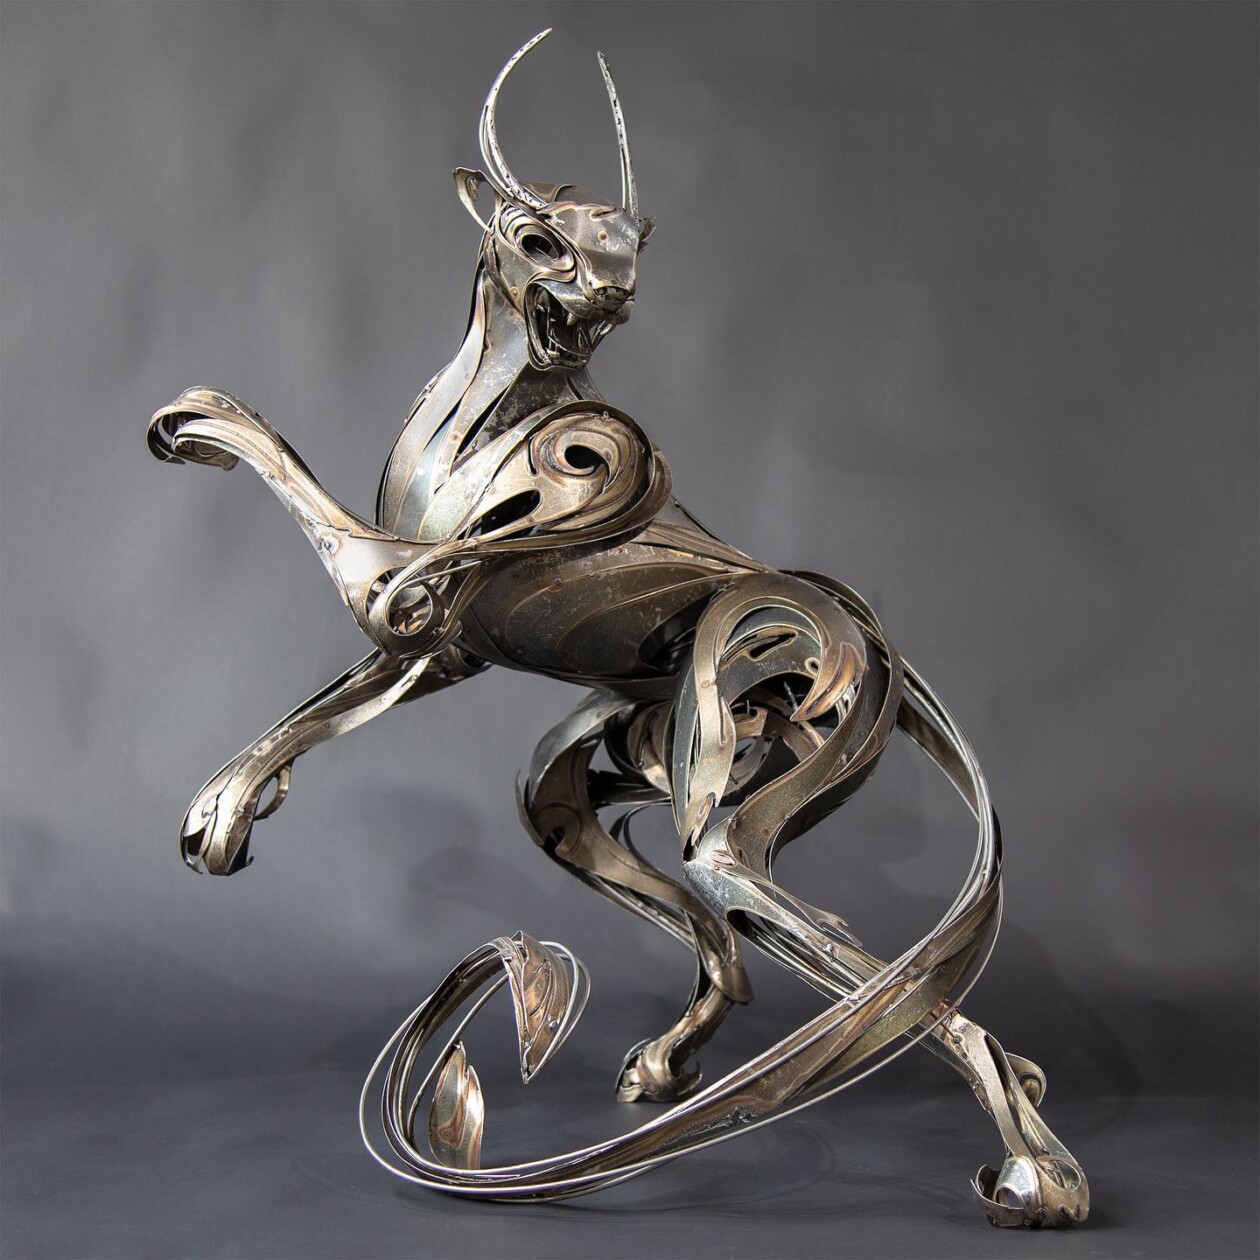 Magnificent Metallic Animal Sculptures Made With Sweeping Lines By Georgie Seccull (20)